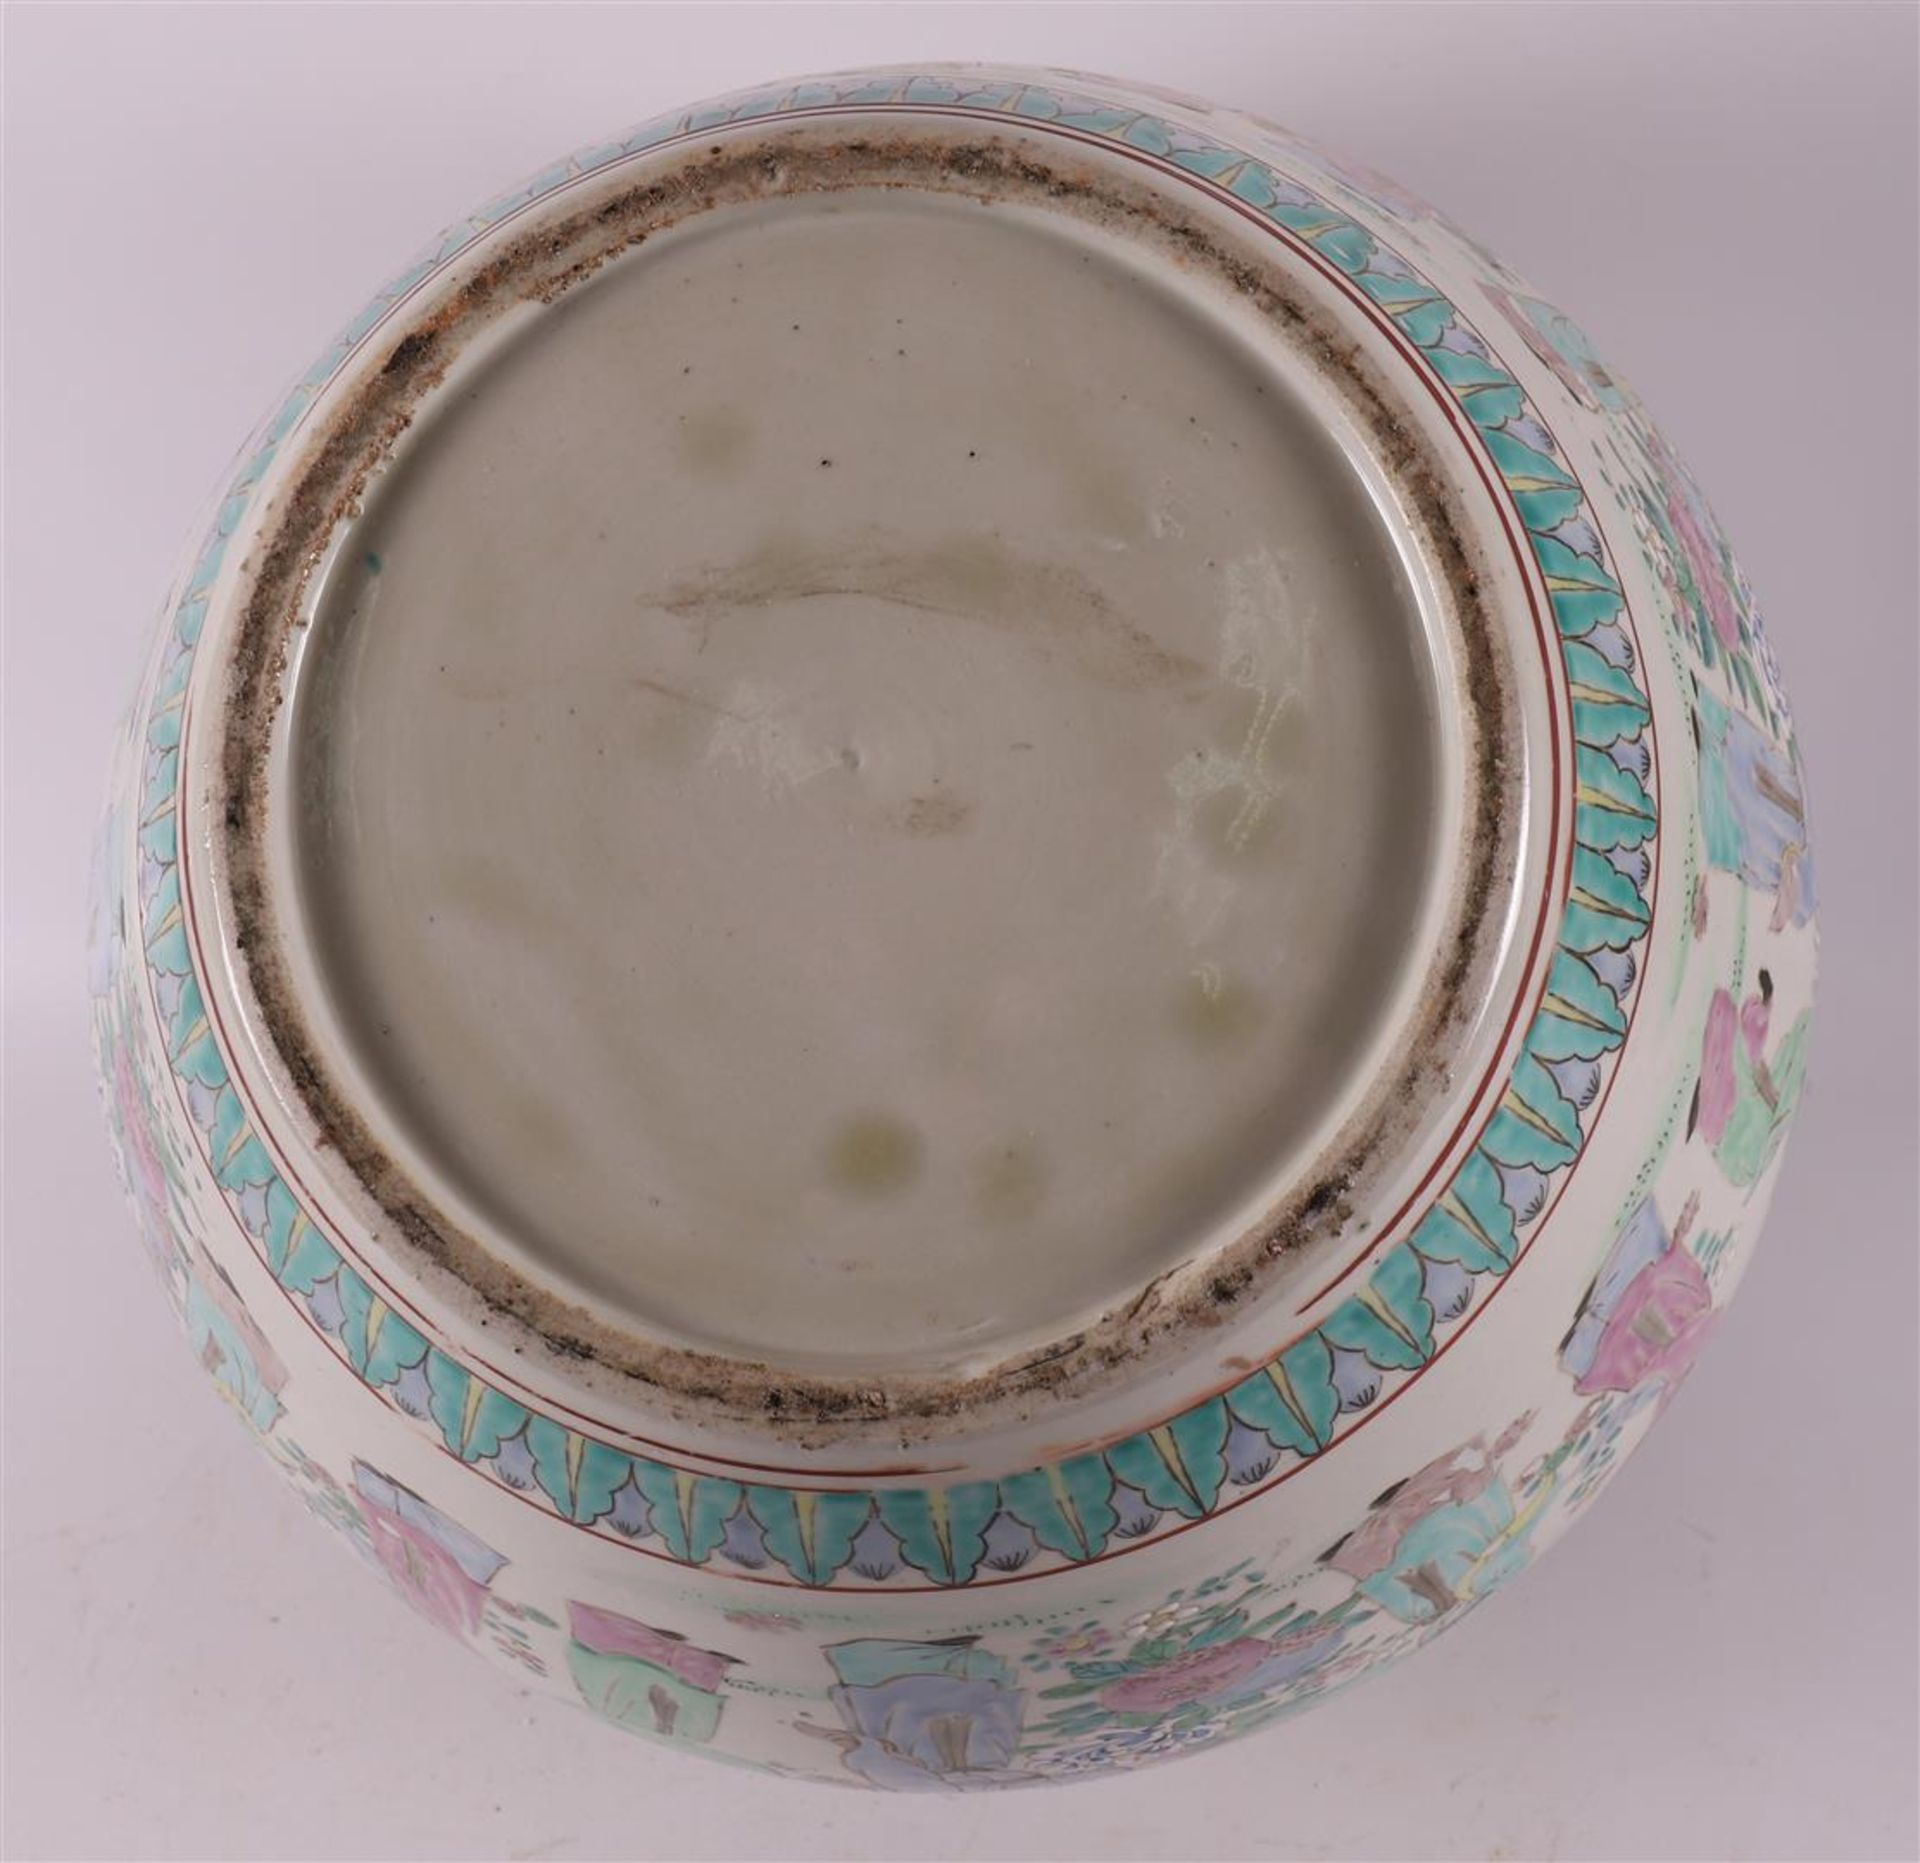 A porcelain cachepot or fishbowl on a loose wooden base, China, 20th century. - Image 7 of 7